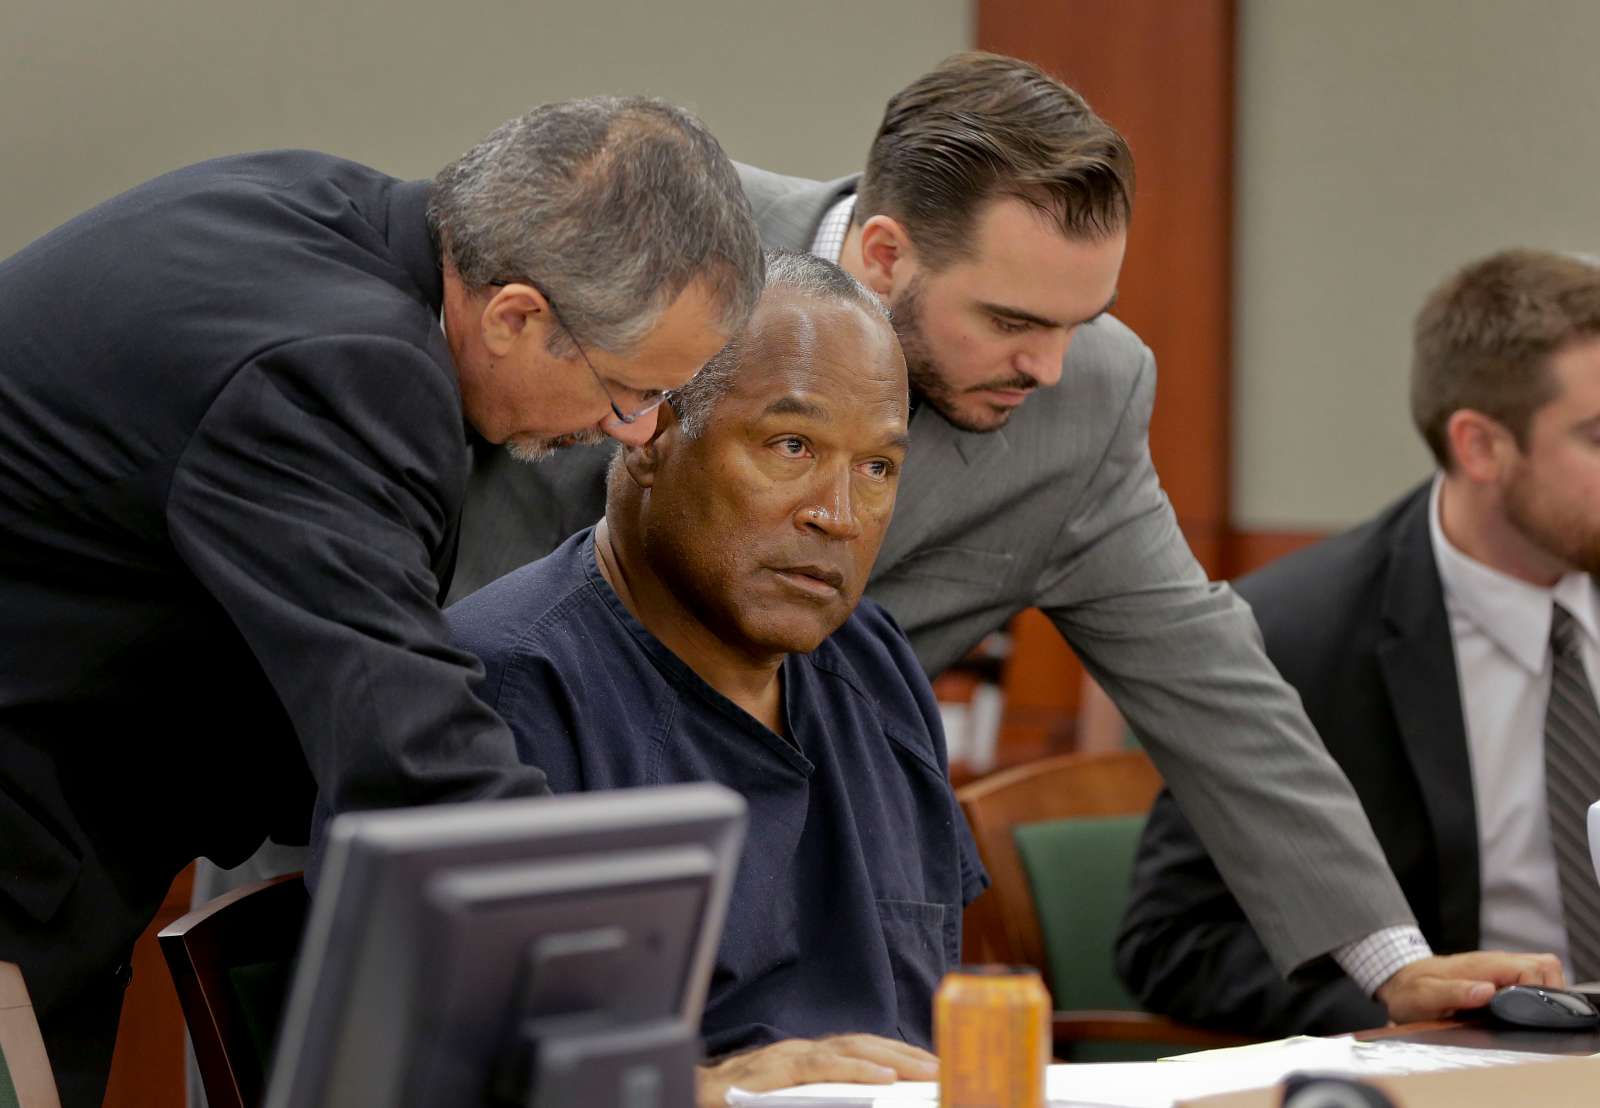 O.J. Simpson: What Is His Net Worth? Is He Still in Prison?